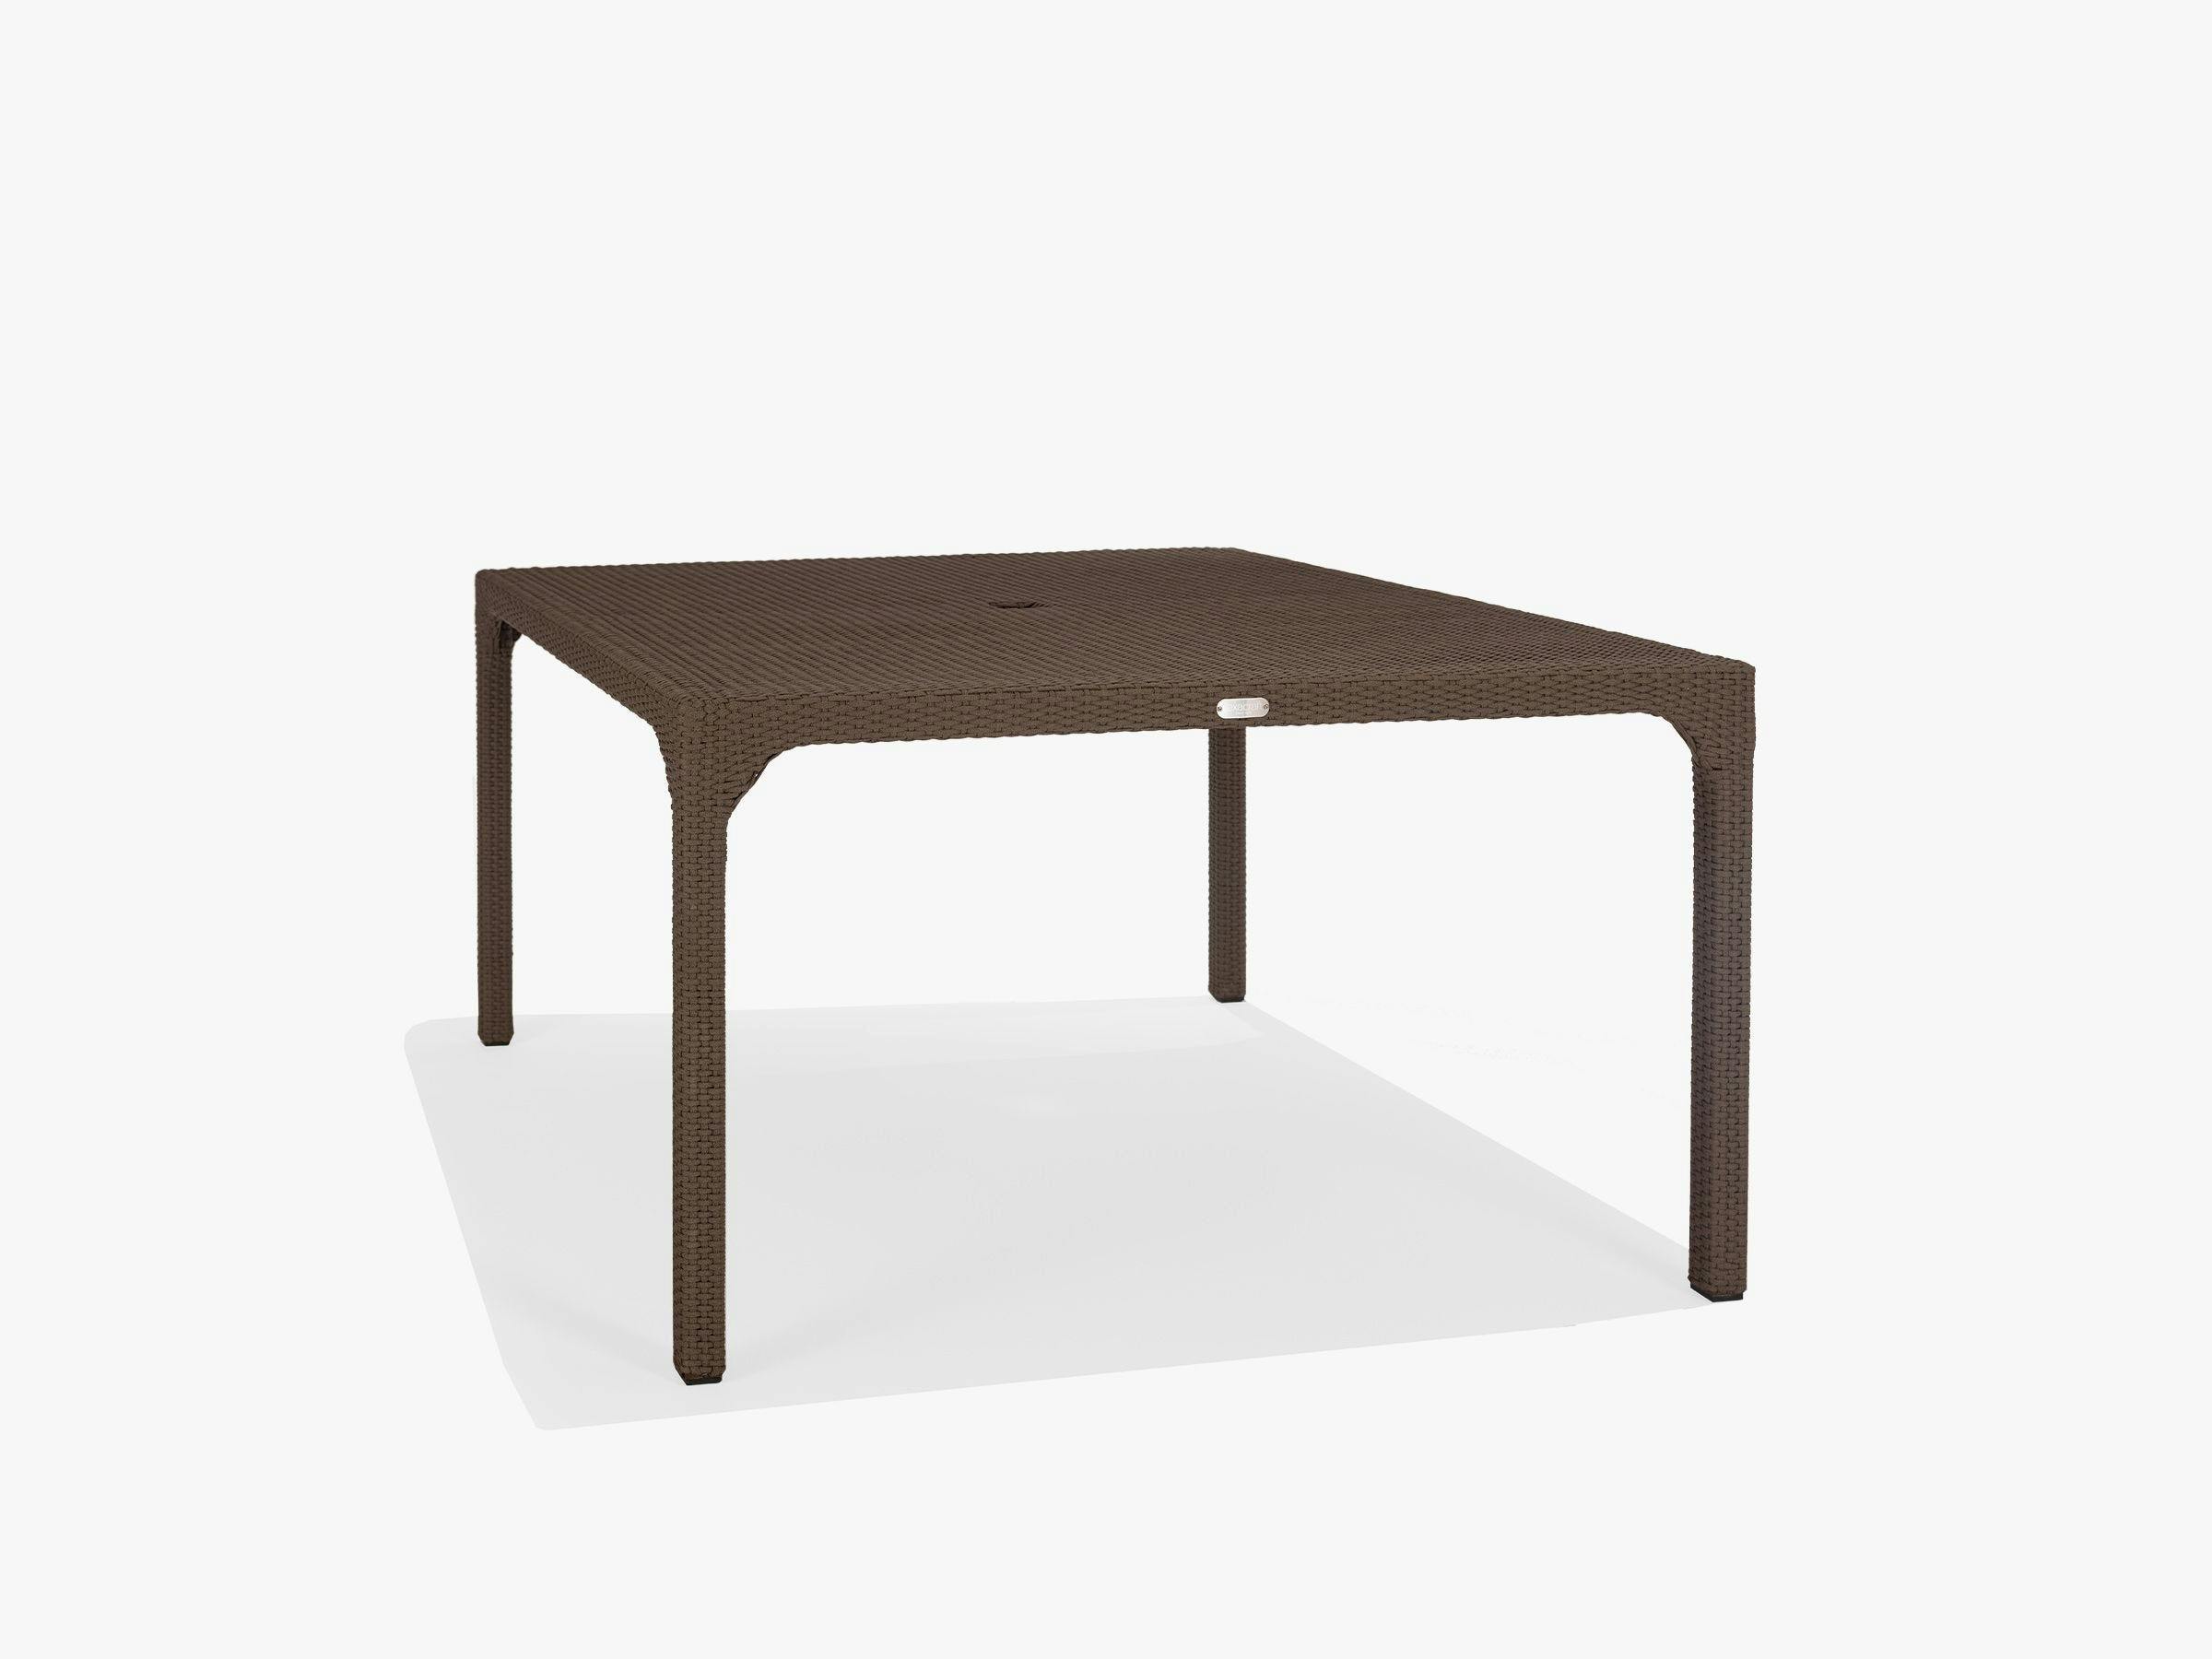 Em 48" Square Dining Table with umbrella hole